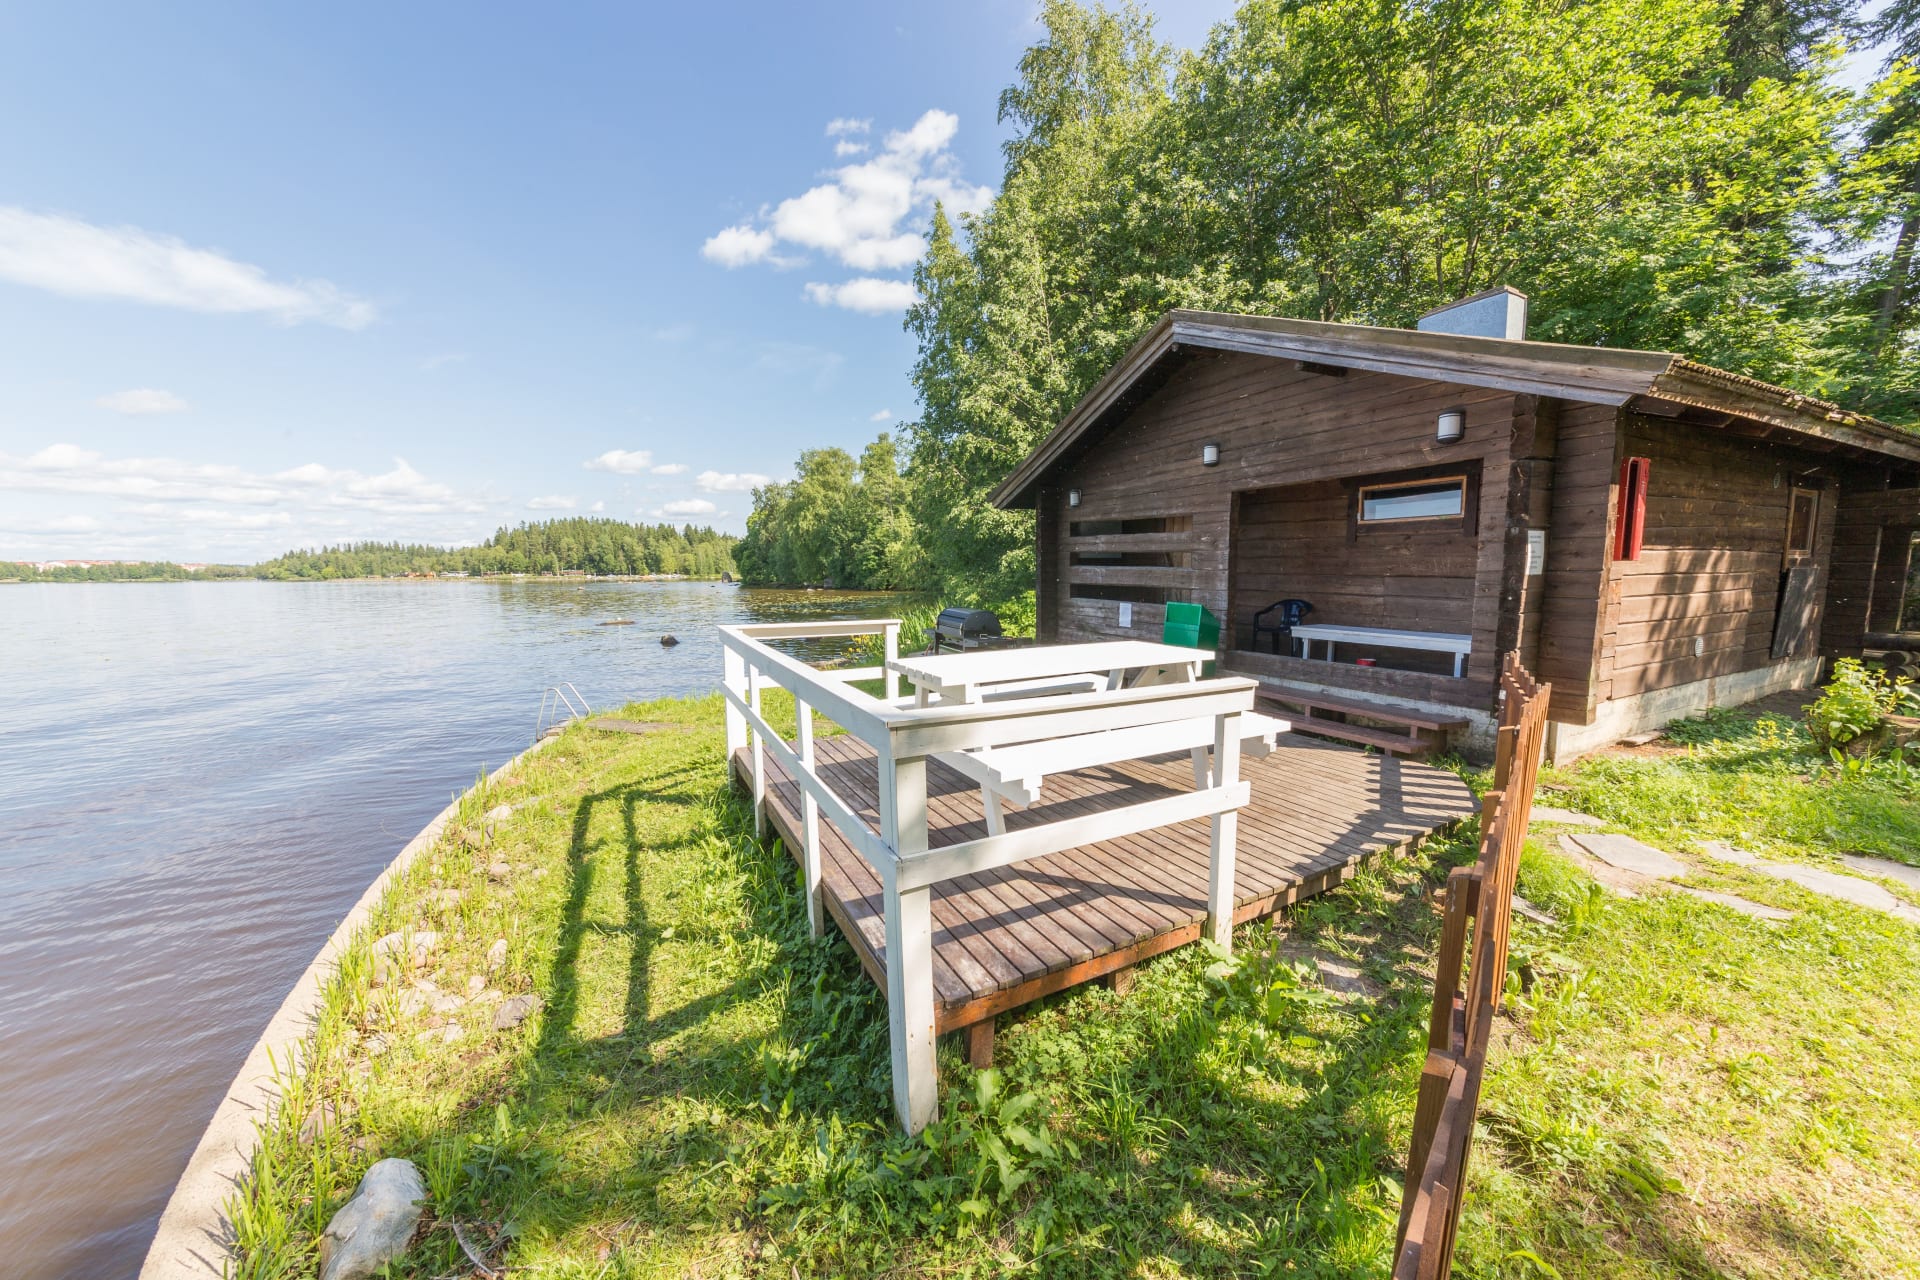 Rent Finnish Sauna with your friends of Family in Härmälä Camping